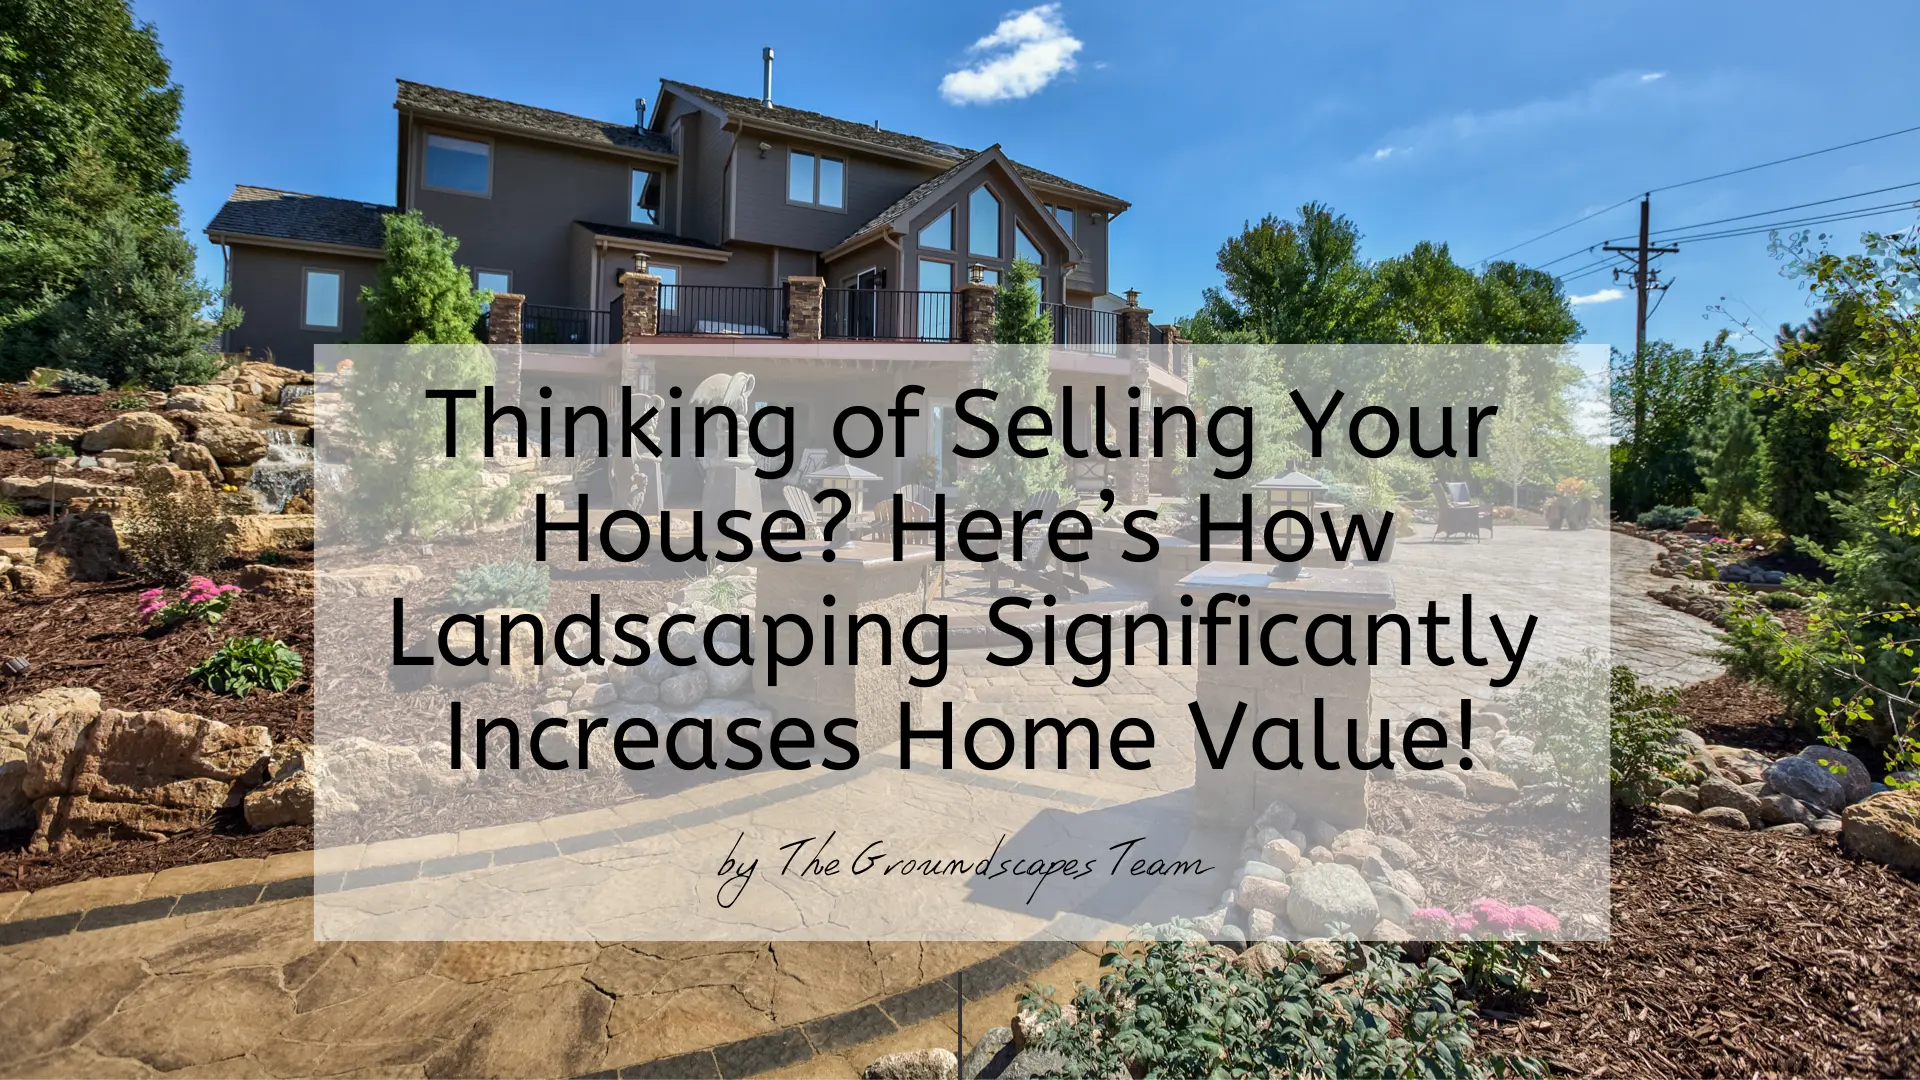 Thinking of Selling Your House? Here's How Landscaping Significantly Increases Home Value!